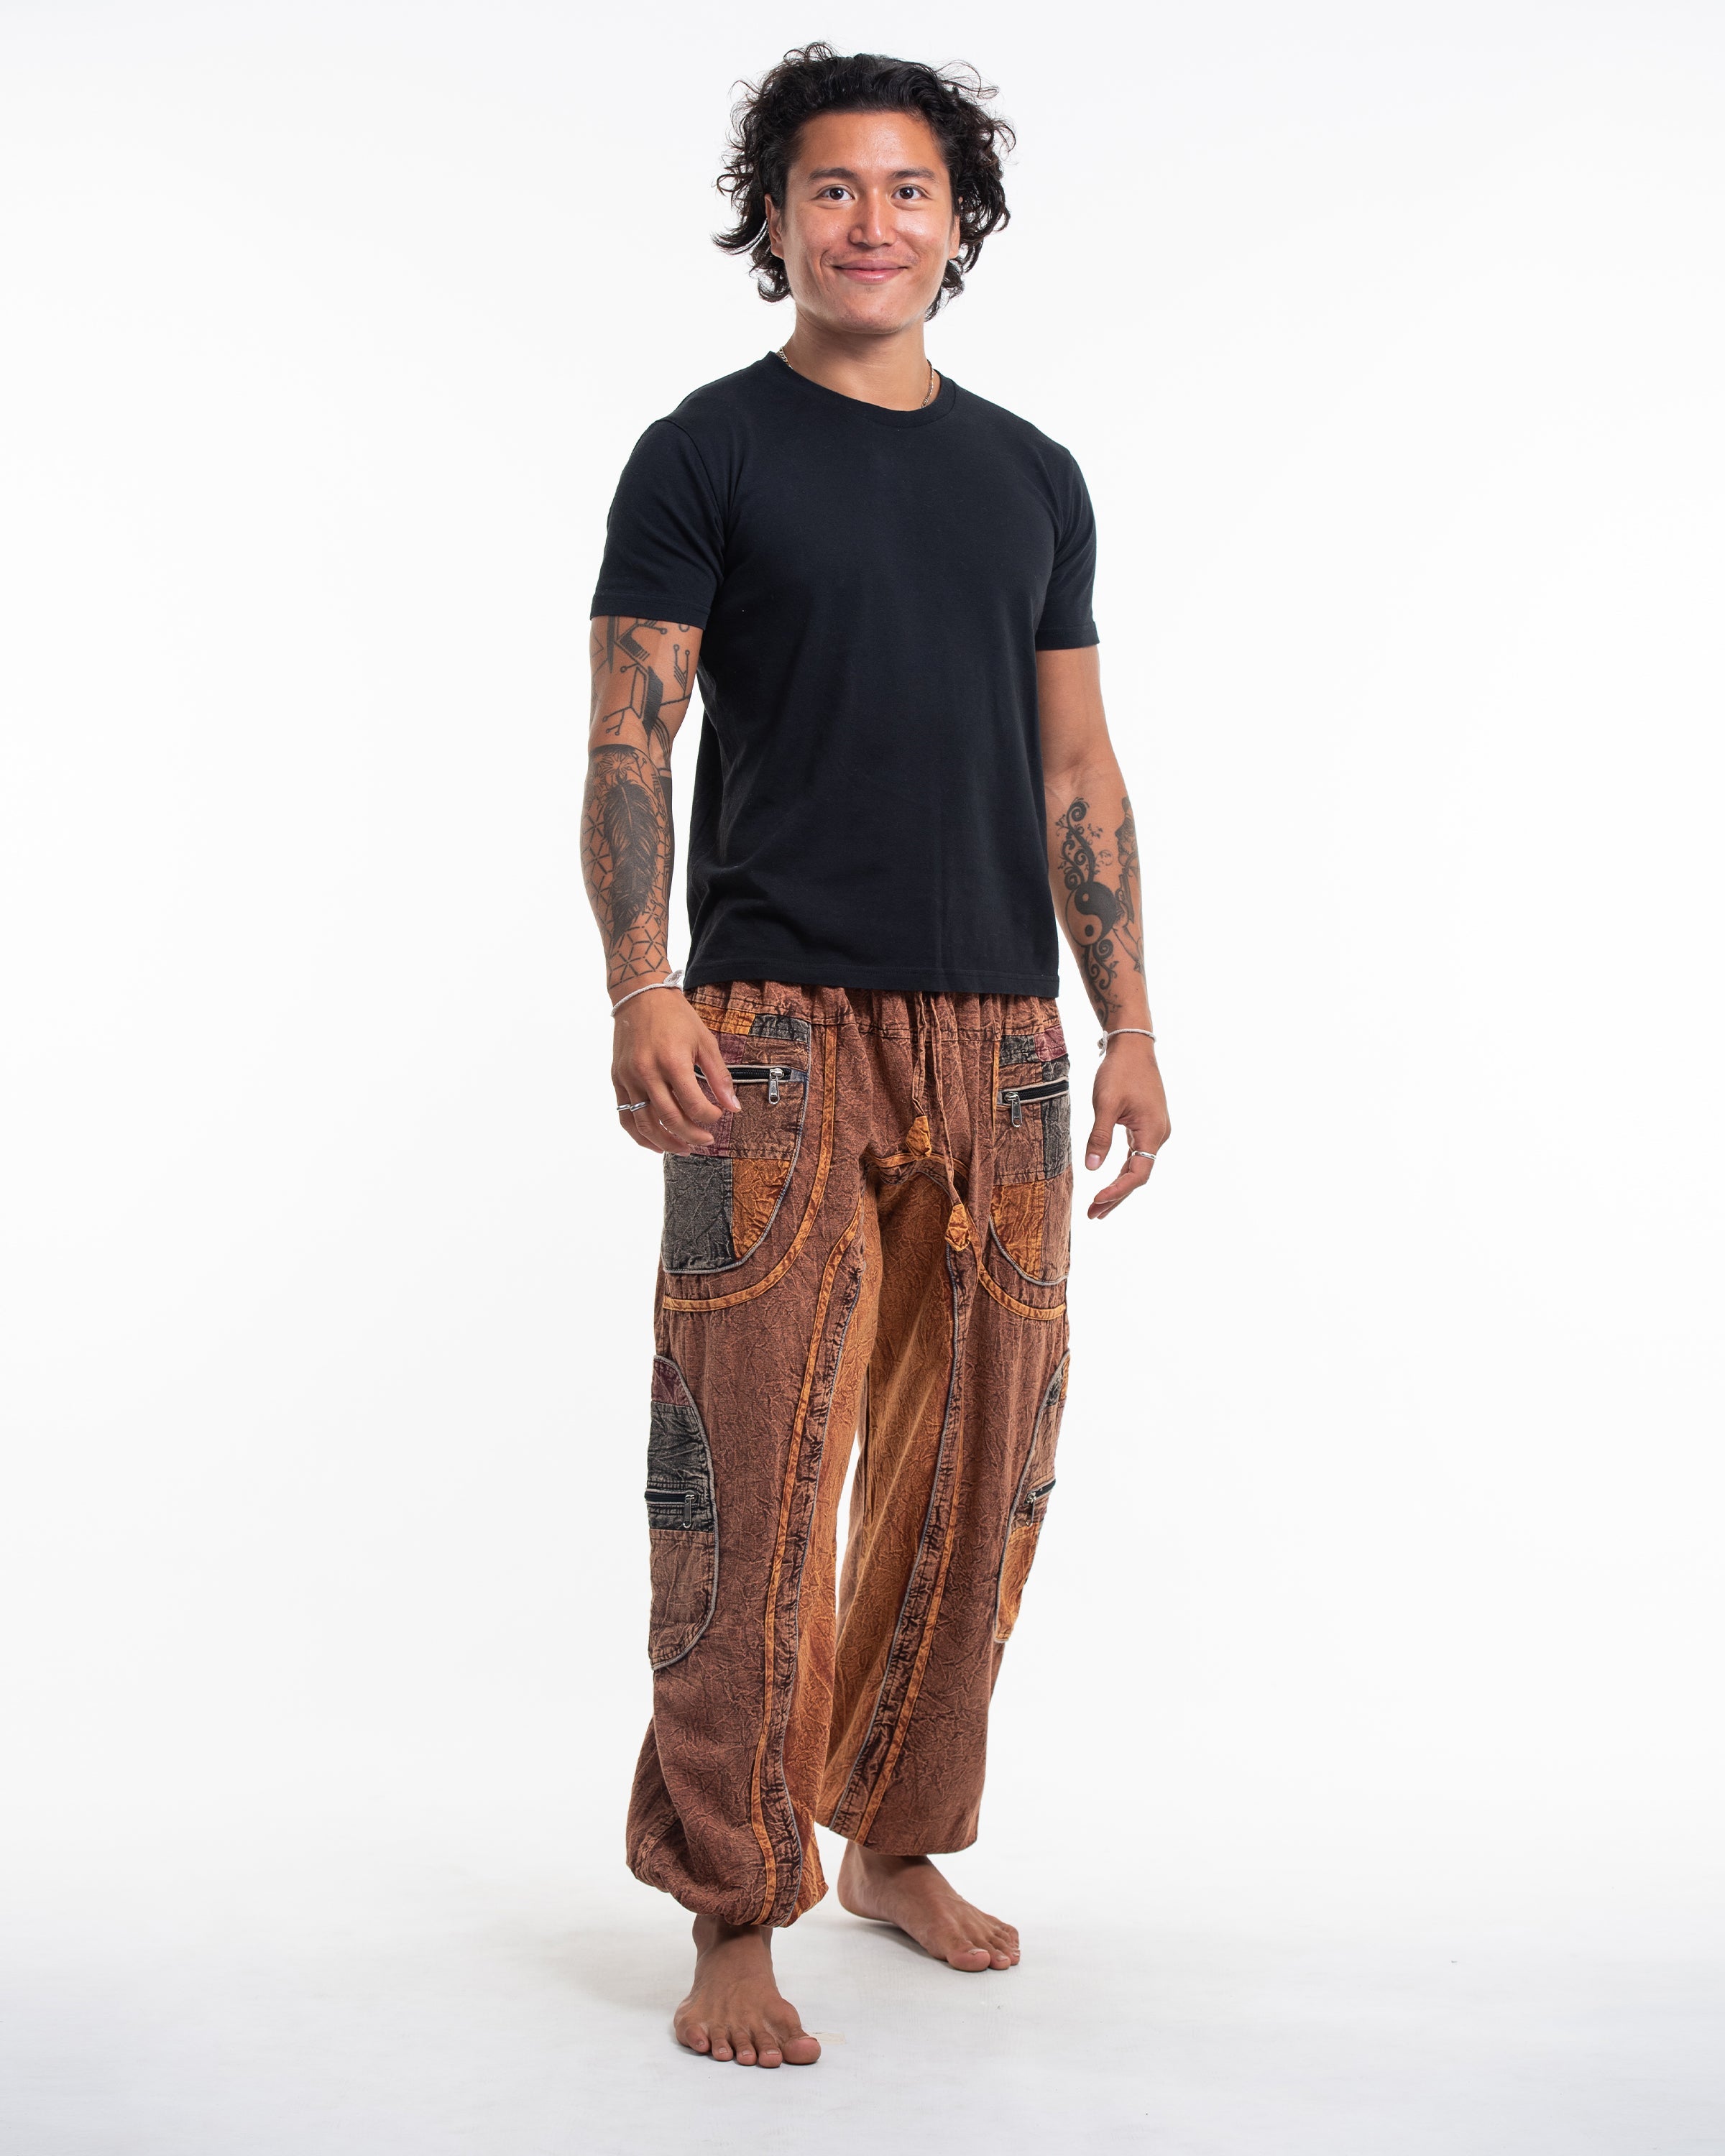 Men See Through Sexy Harem Pants, Mesh Sheer Lounge Hippie Trousers,  Coquette Style, Free Shipping For New Users